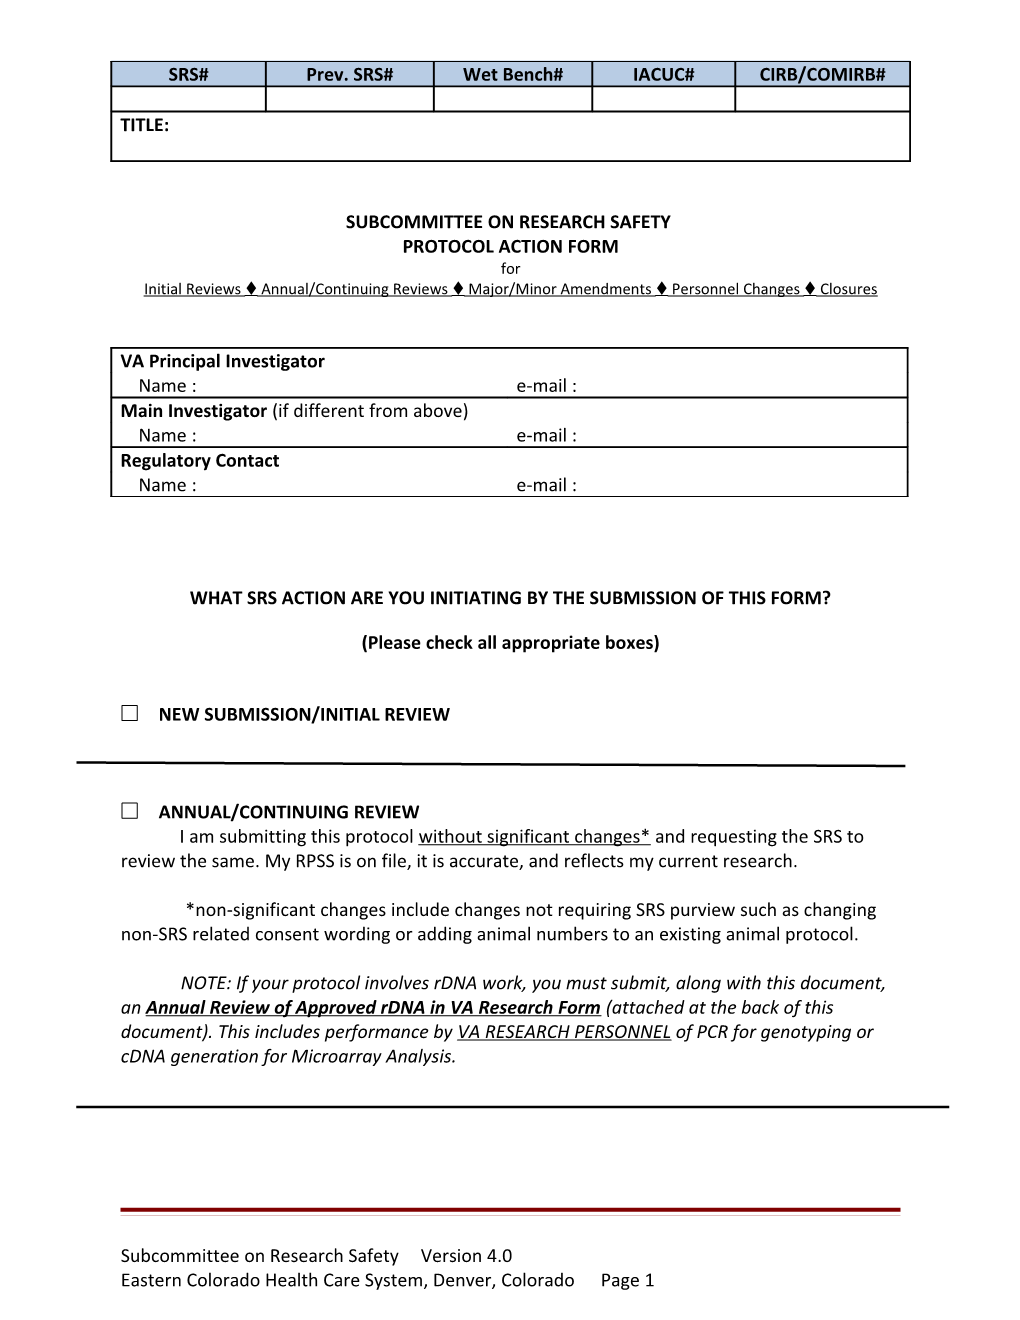 What Srs Action Are You Initiating by the Submission of This Form?